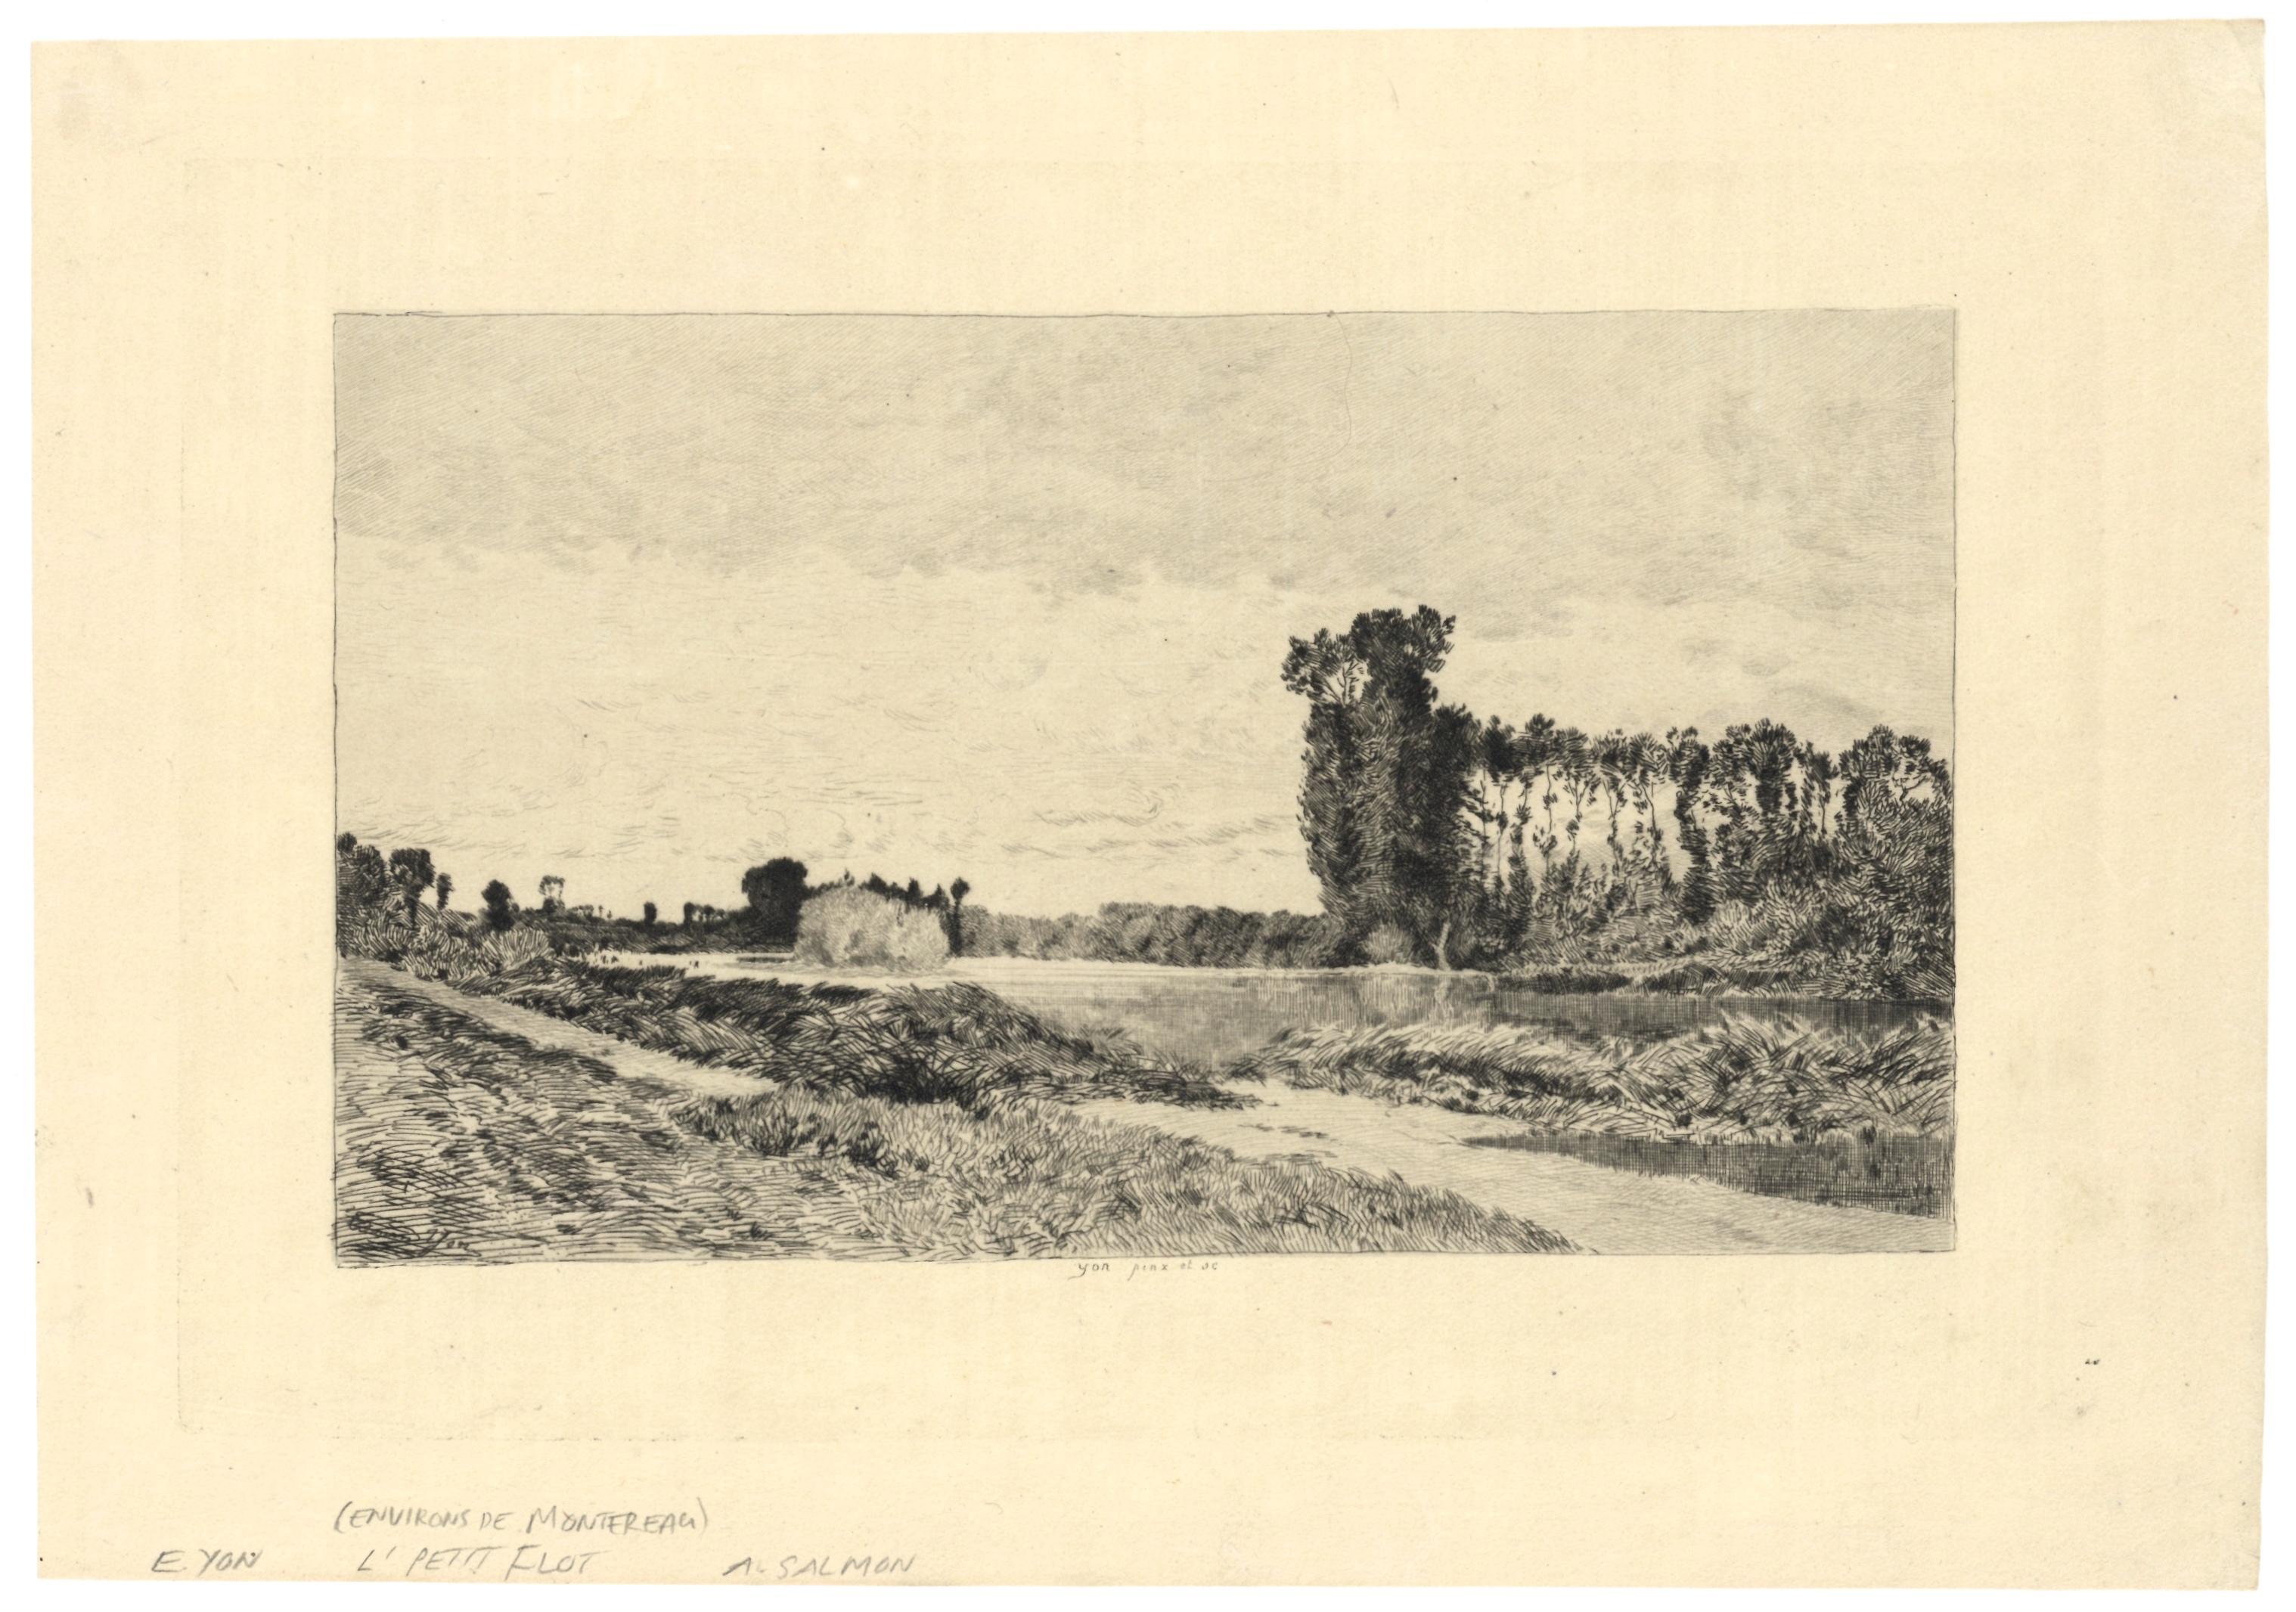 Medium: original etching. This impression on japon paper was printed in 1875 and published in Paris by L'Art. Image size: 5 1/8 x 9 inches (132 x 225 mm). Signed in the plate; not hand-signed. 

Condition: a previous owner's penciled annotation can